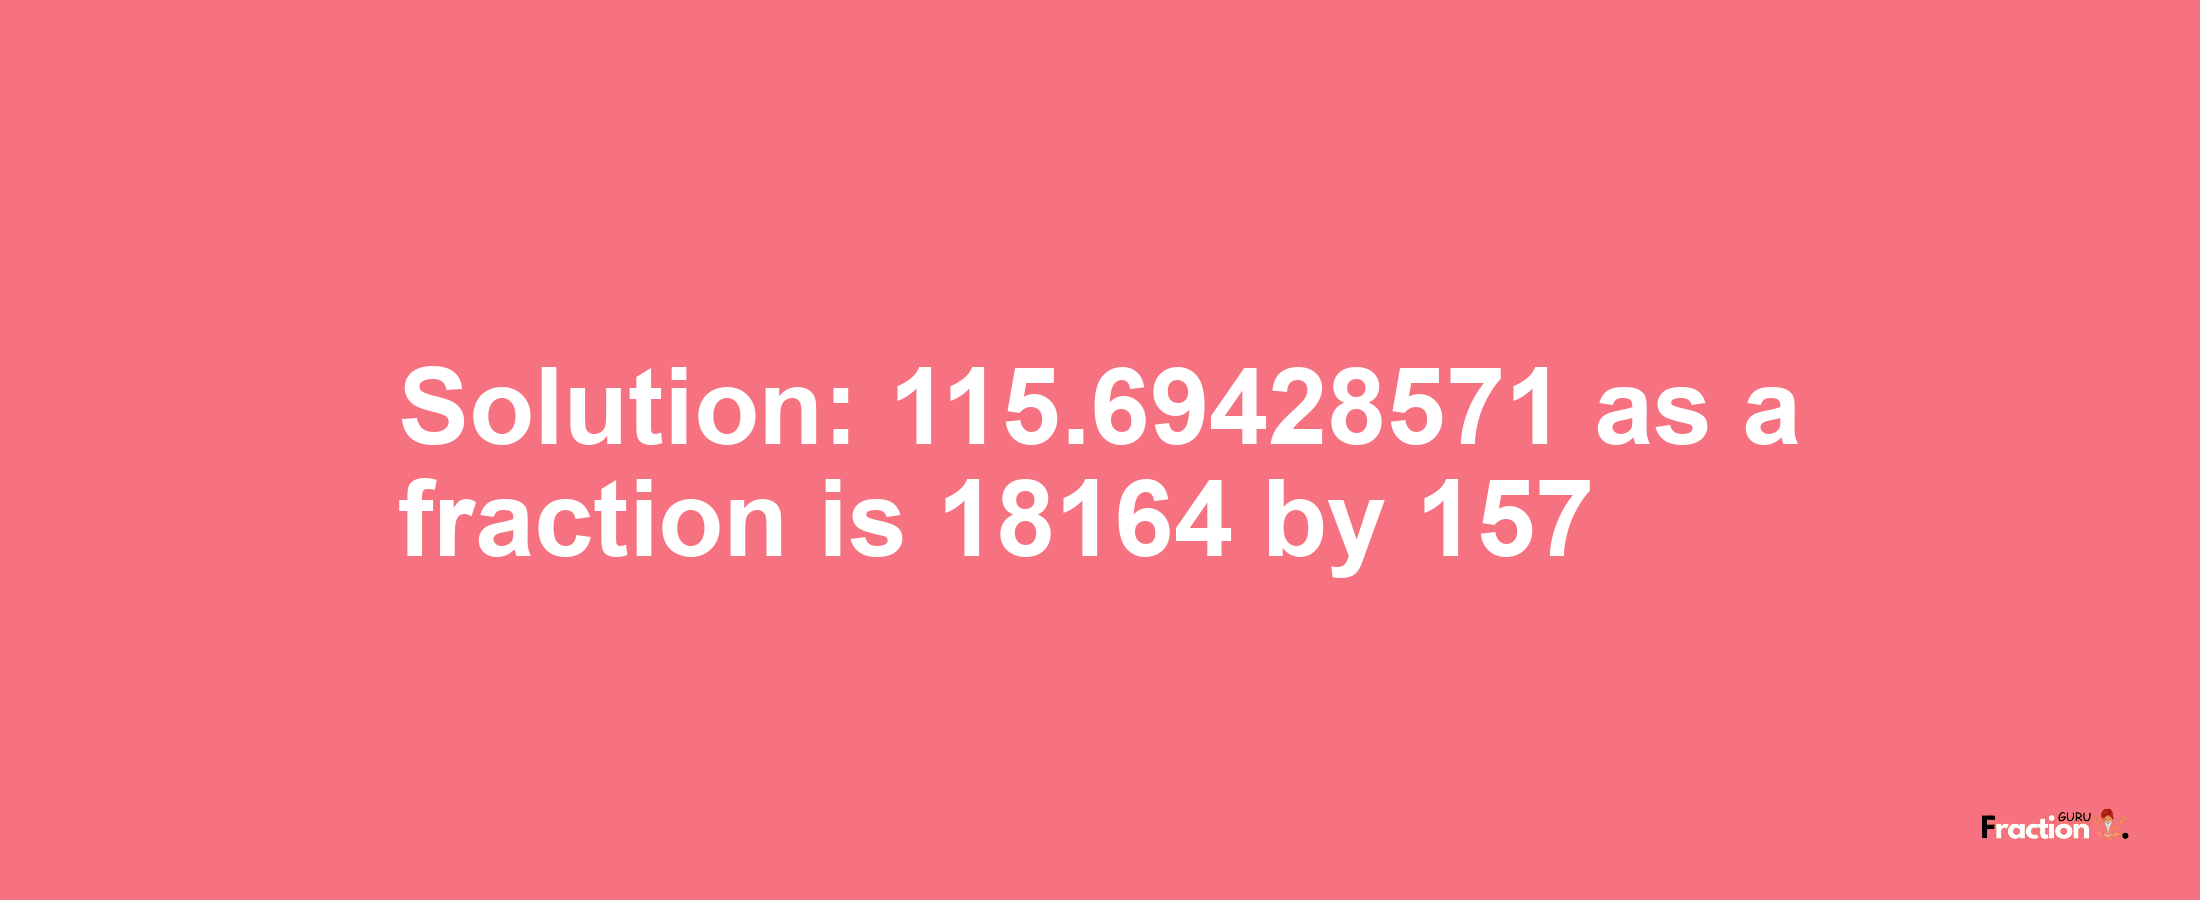 Solution:115.69428571 as a fraction is 18164/157